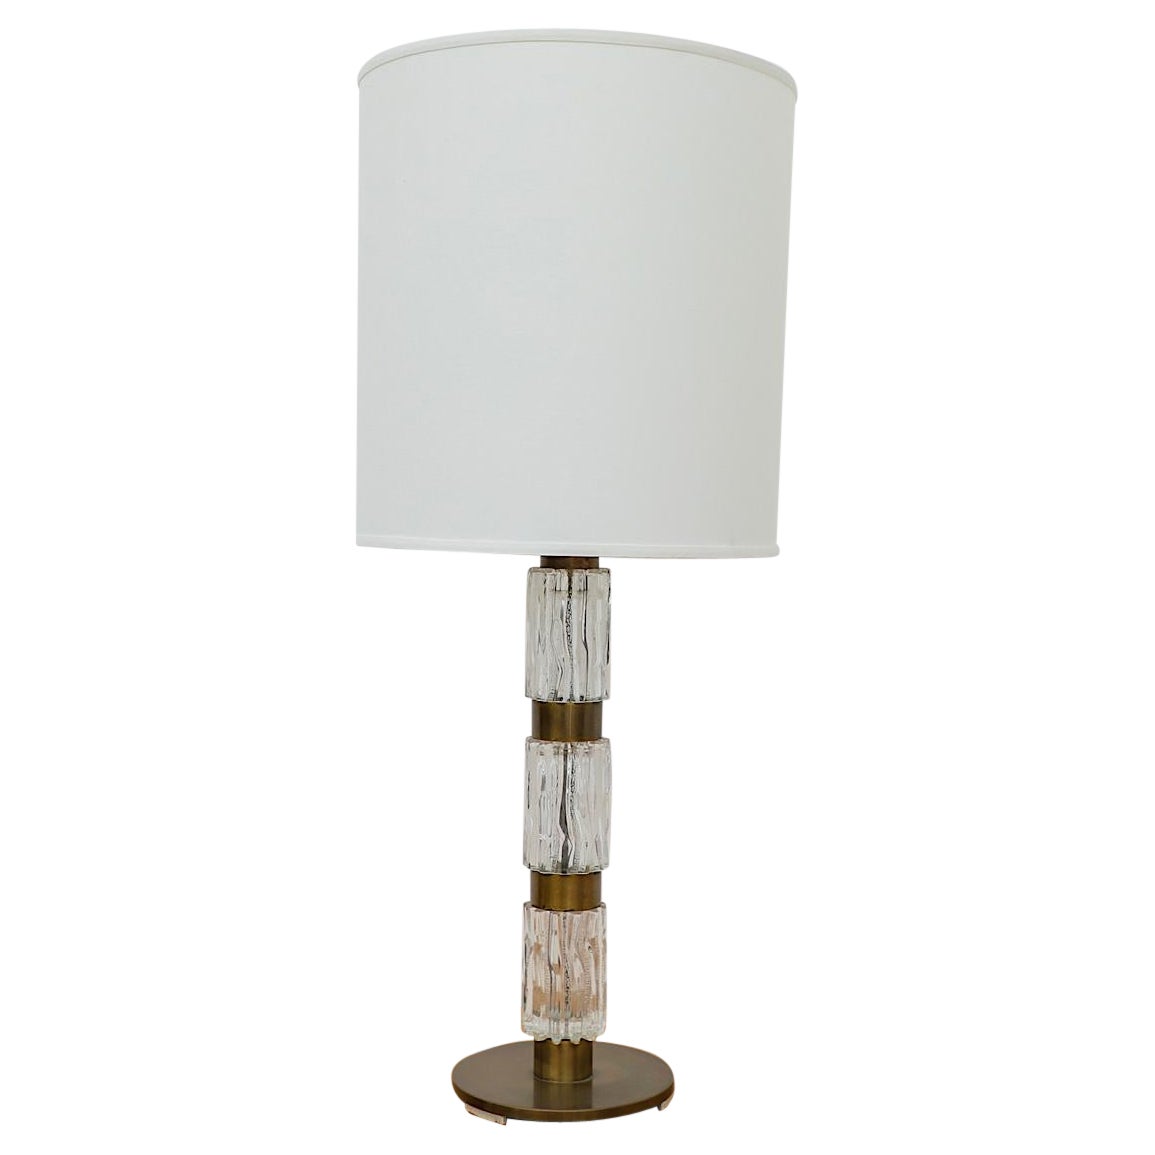 Richard Essig Table Lamps